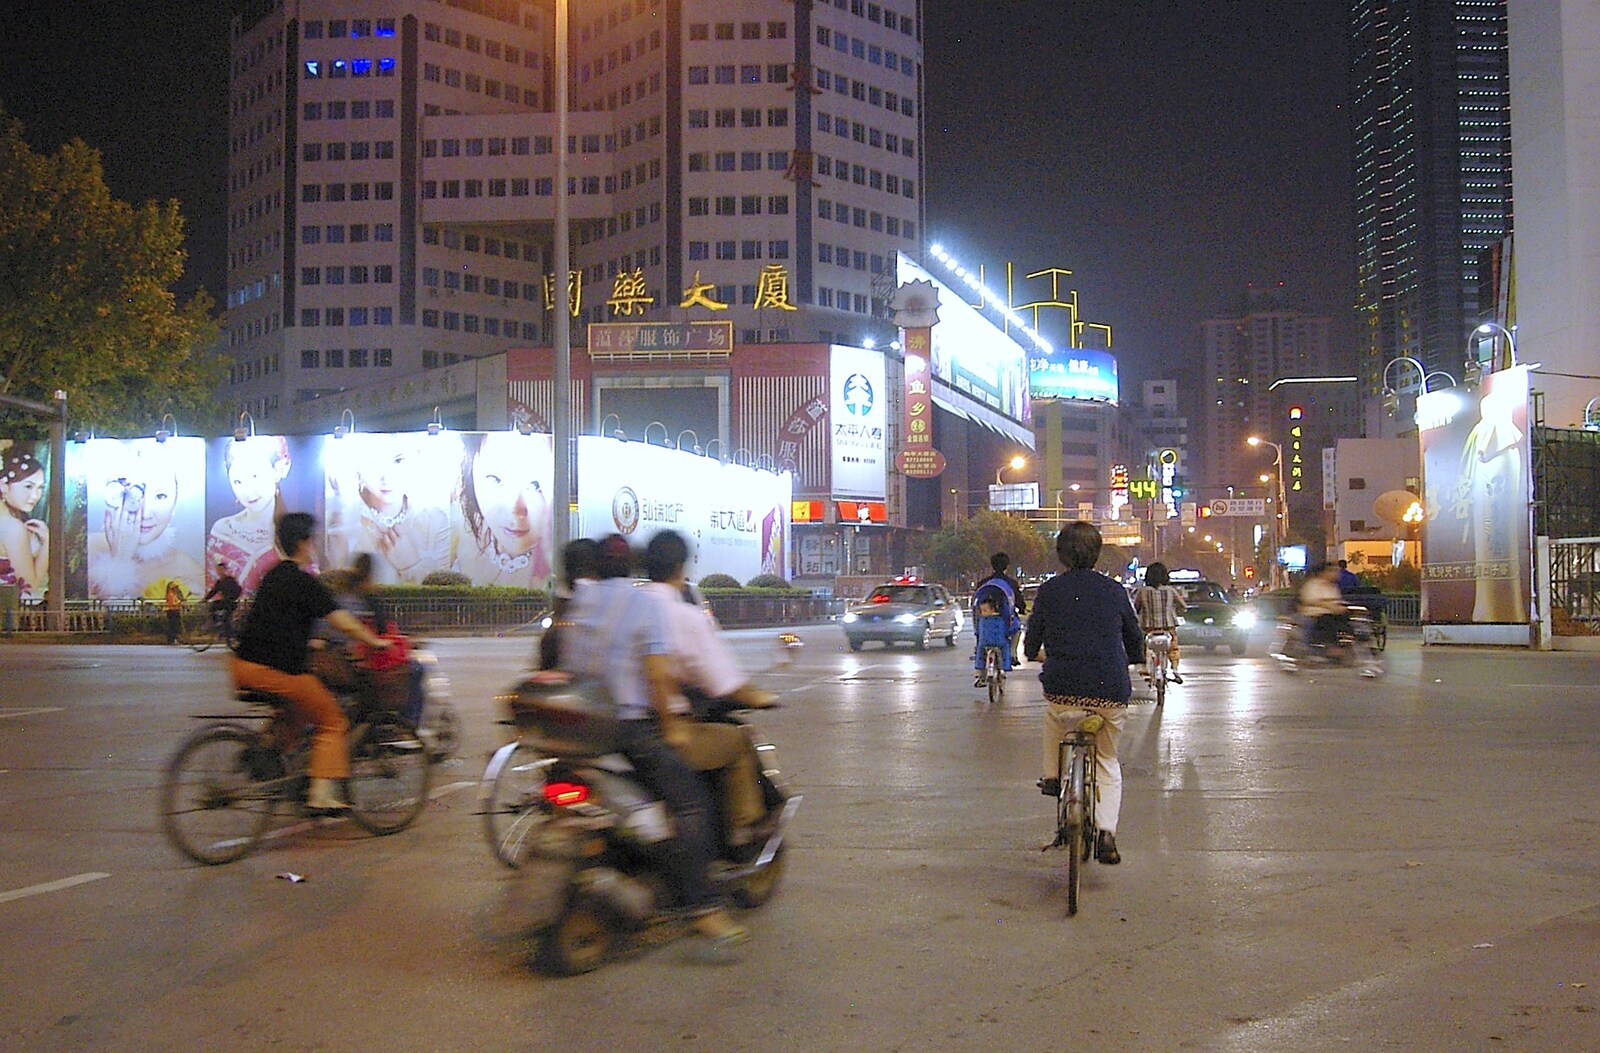 Cycles brave a busy junction from Nanjing by Night, Nanjing, Jiangsu Province, China - 4th October 2006